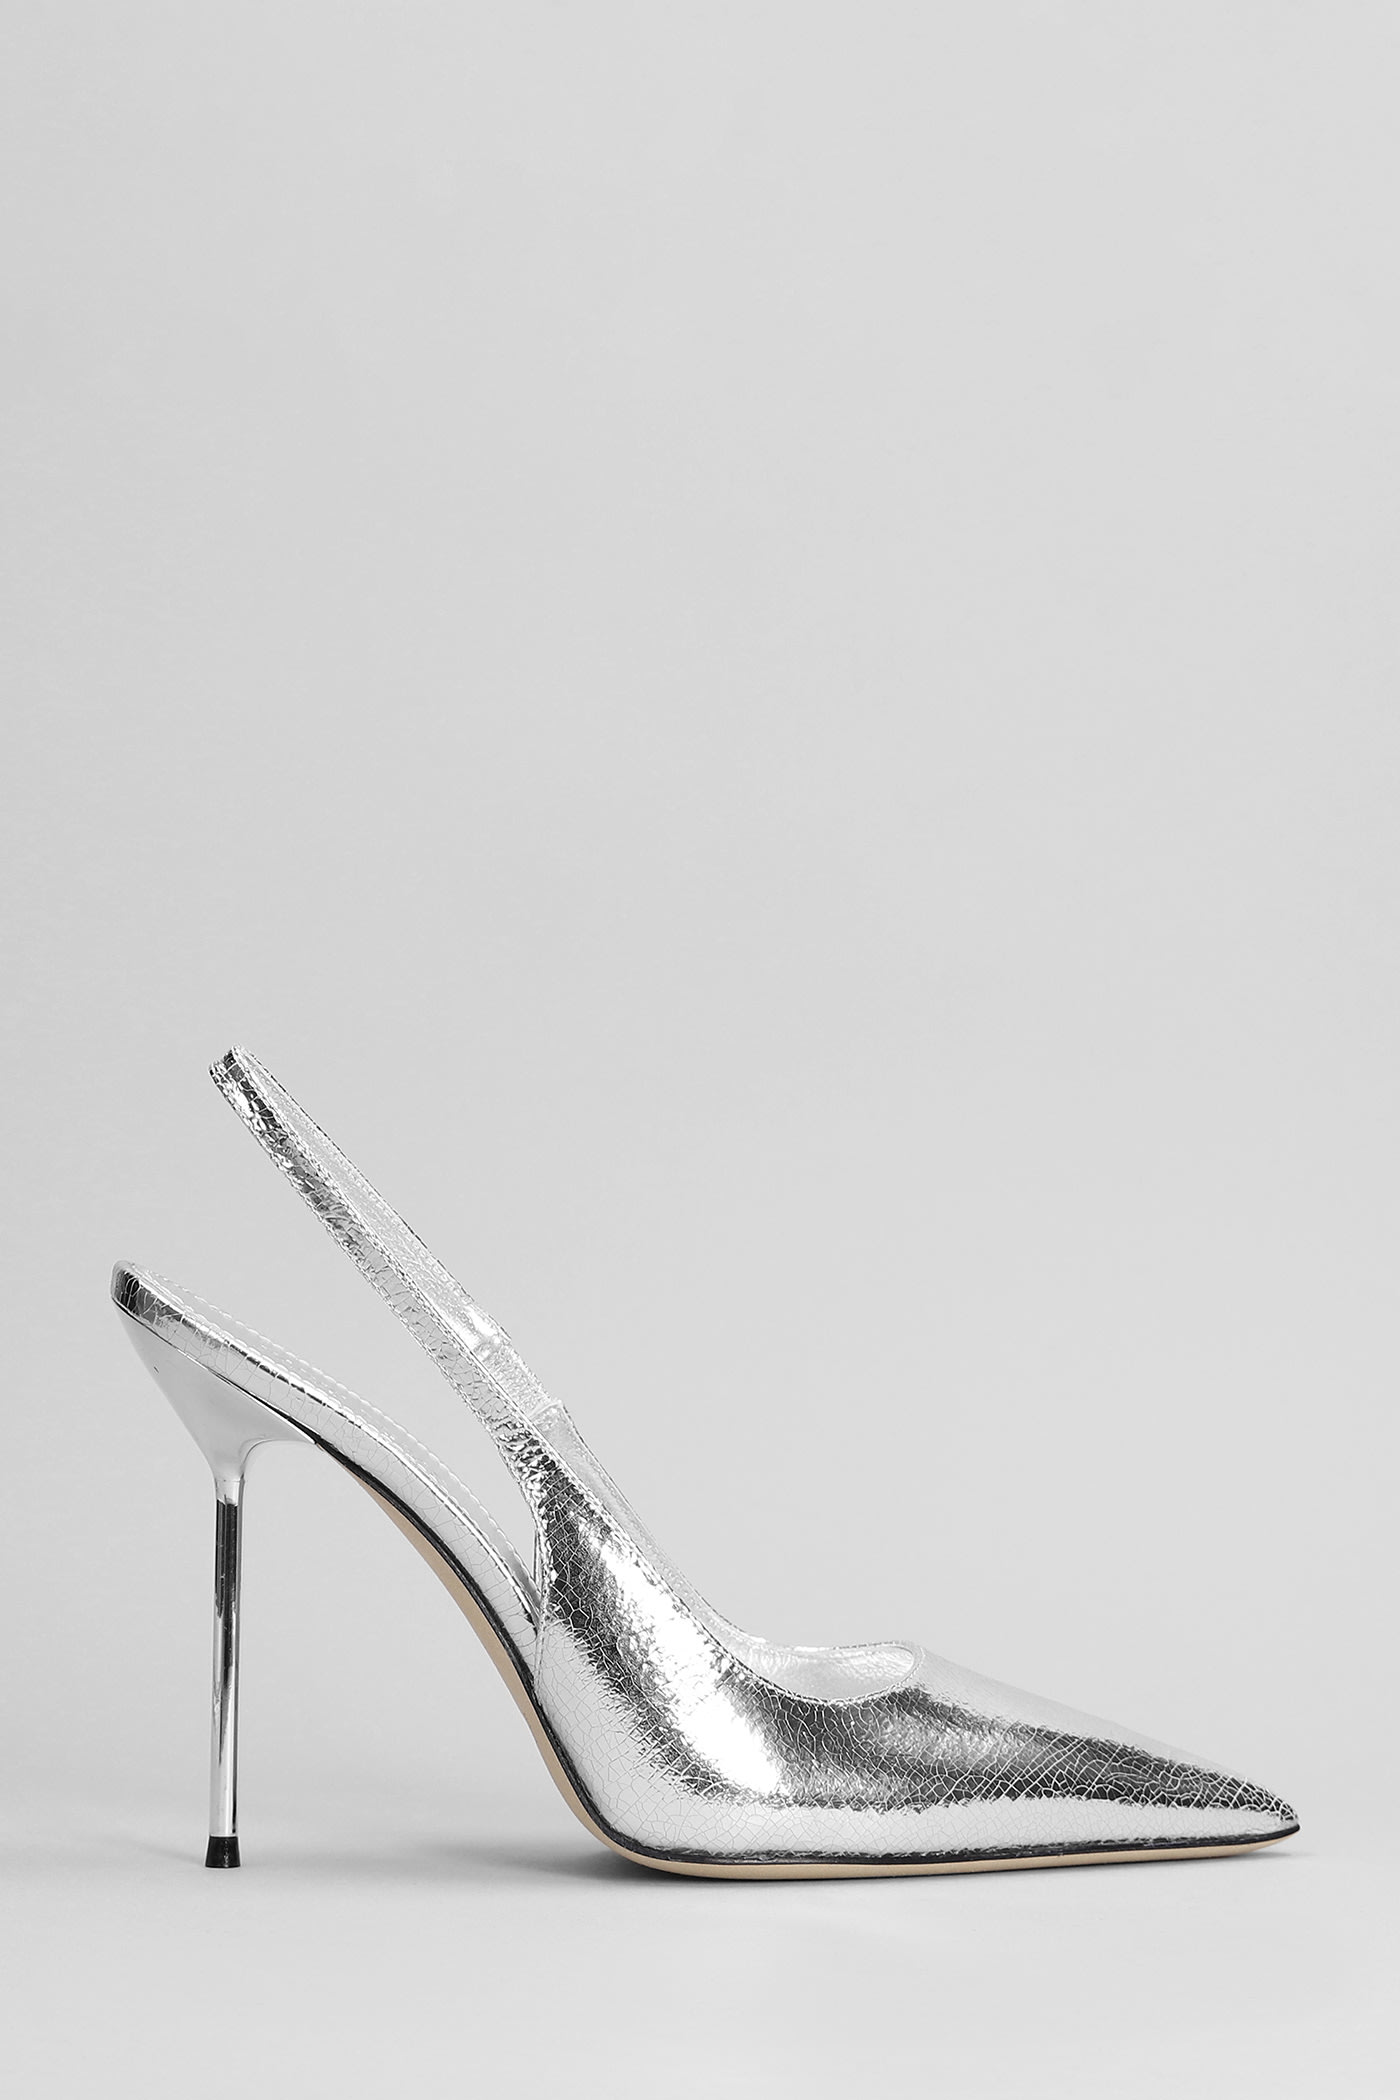 PARIS TEXAS LIDIA PUMPS IN SILVER LEATHER